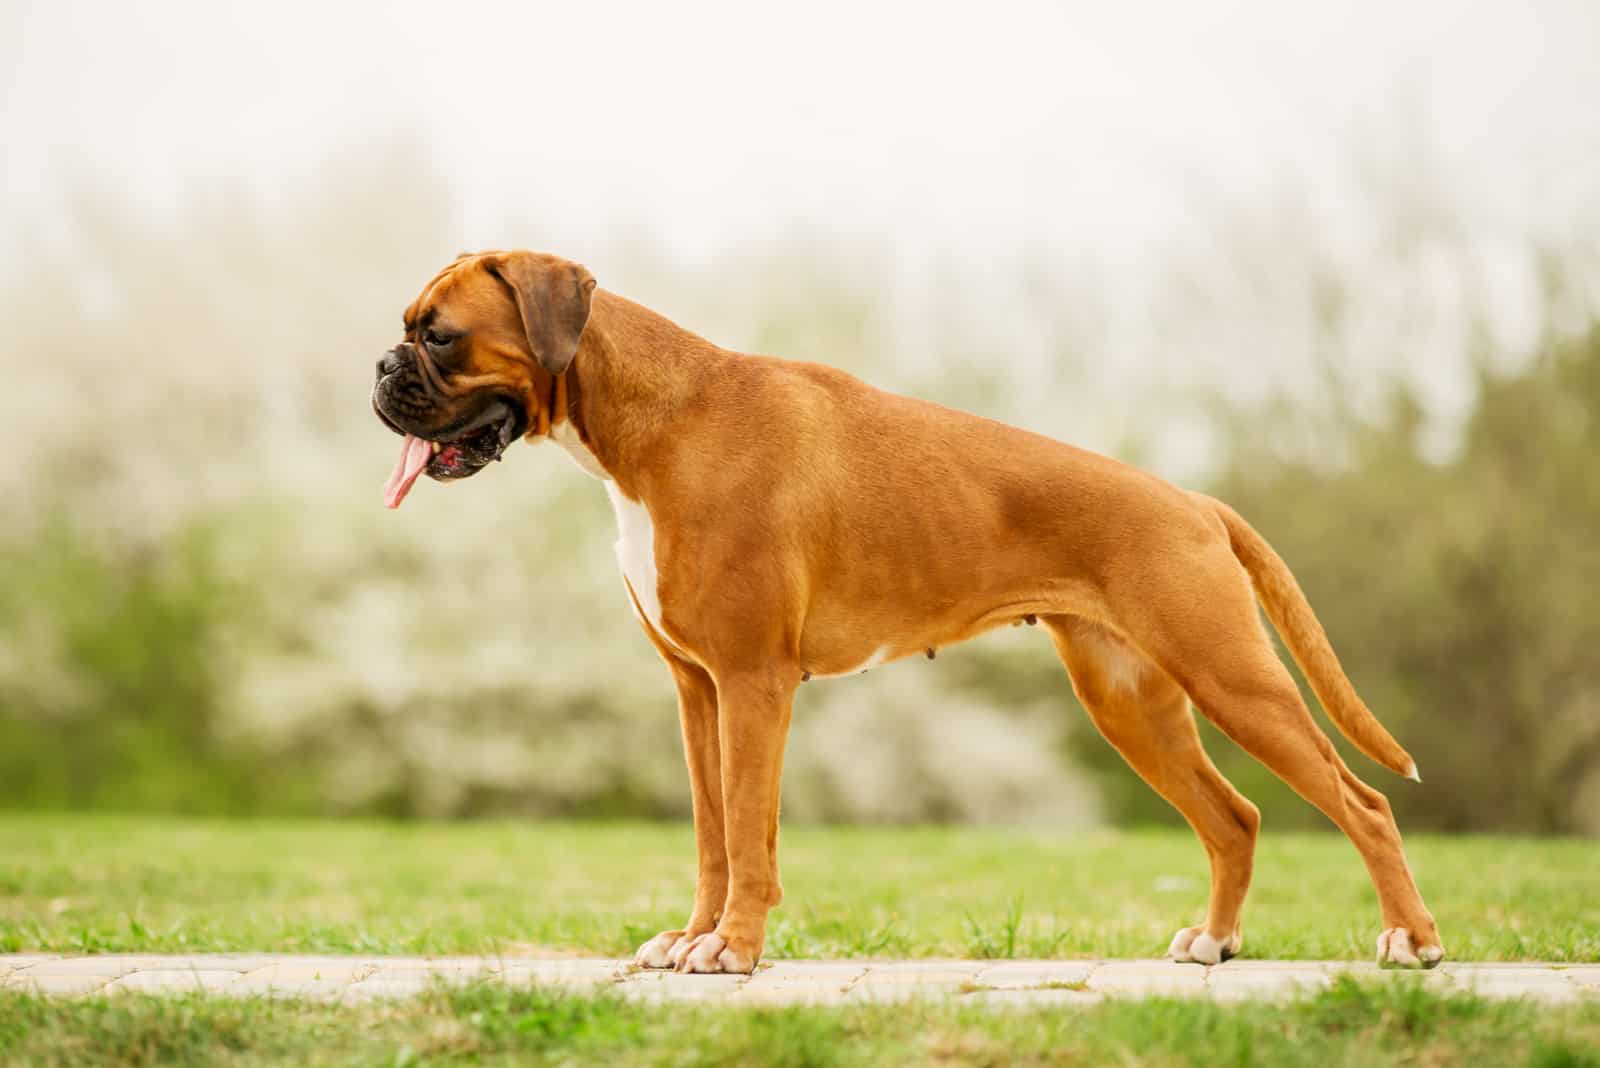 Boxer dog standing on grass outside